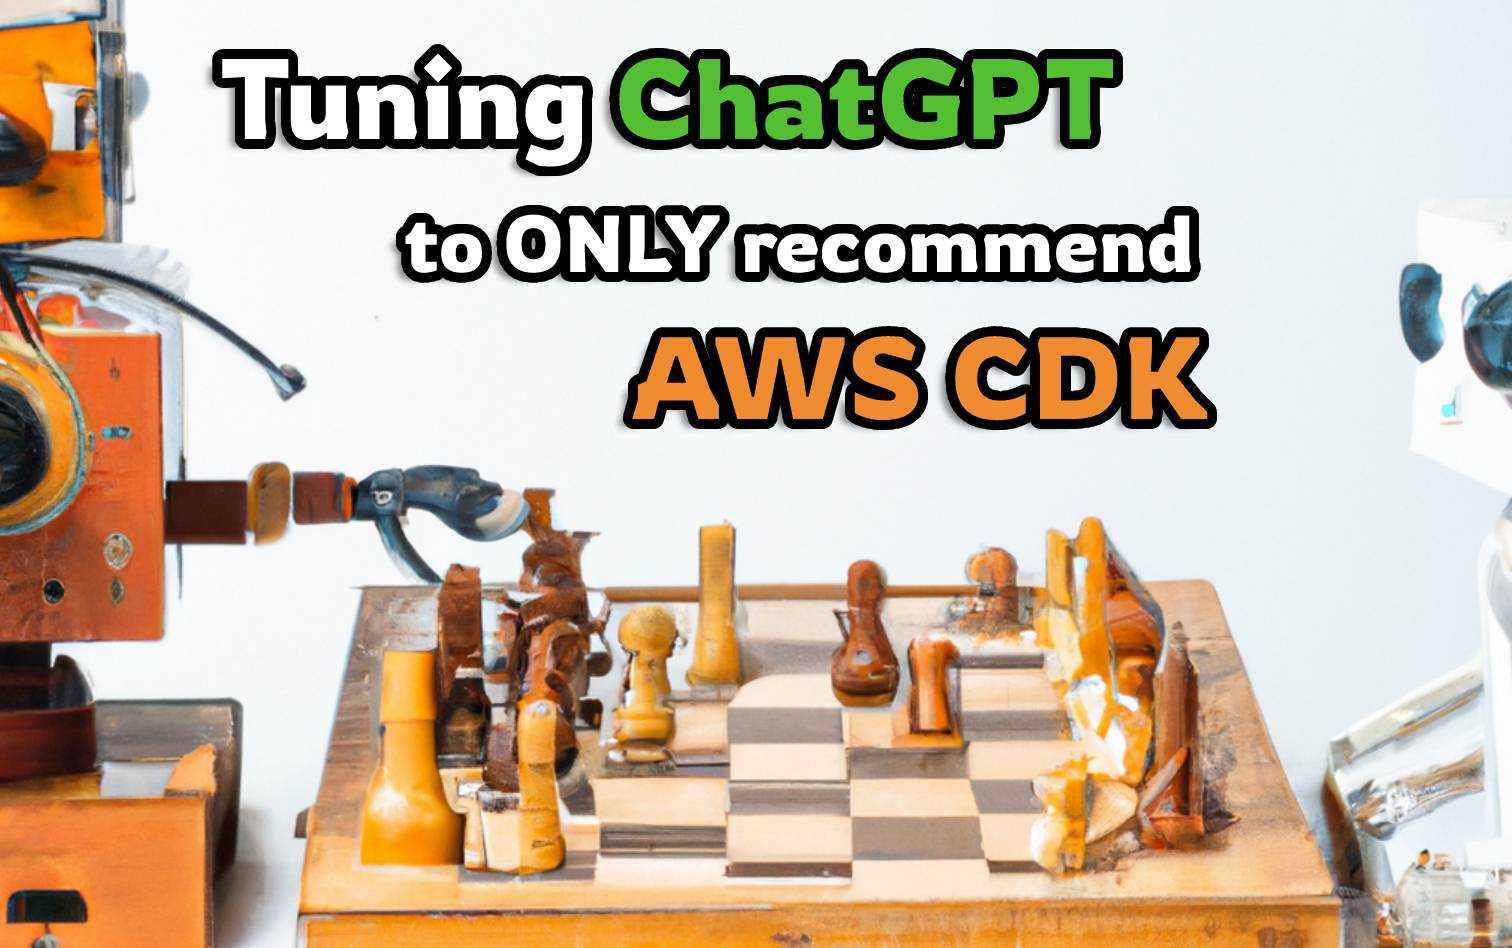 Fine tuning a GPT model that recommends nothing but AWS CDK